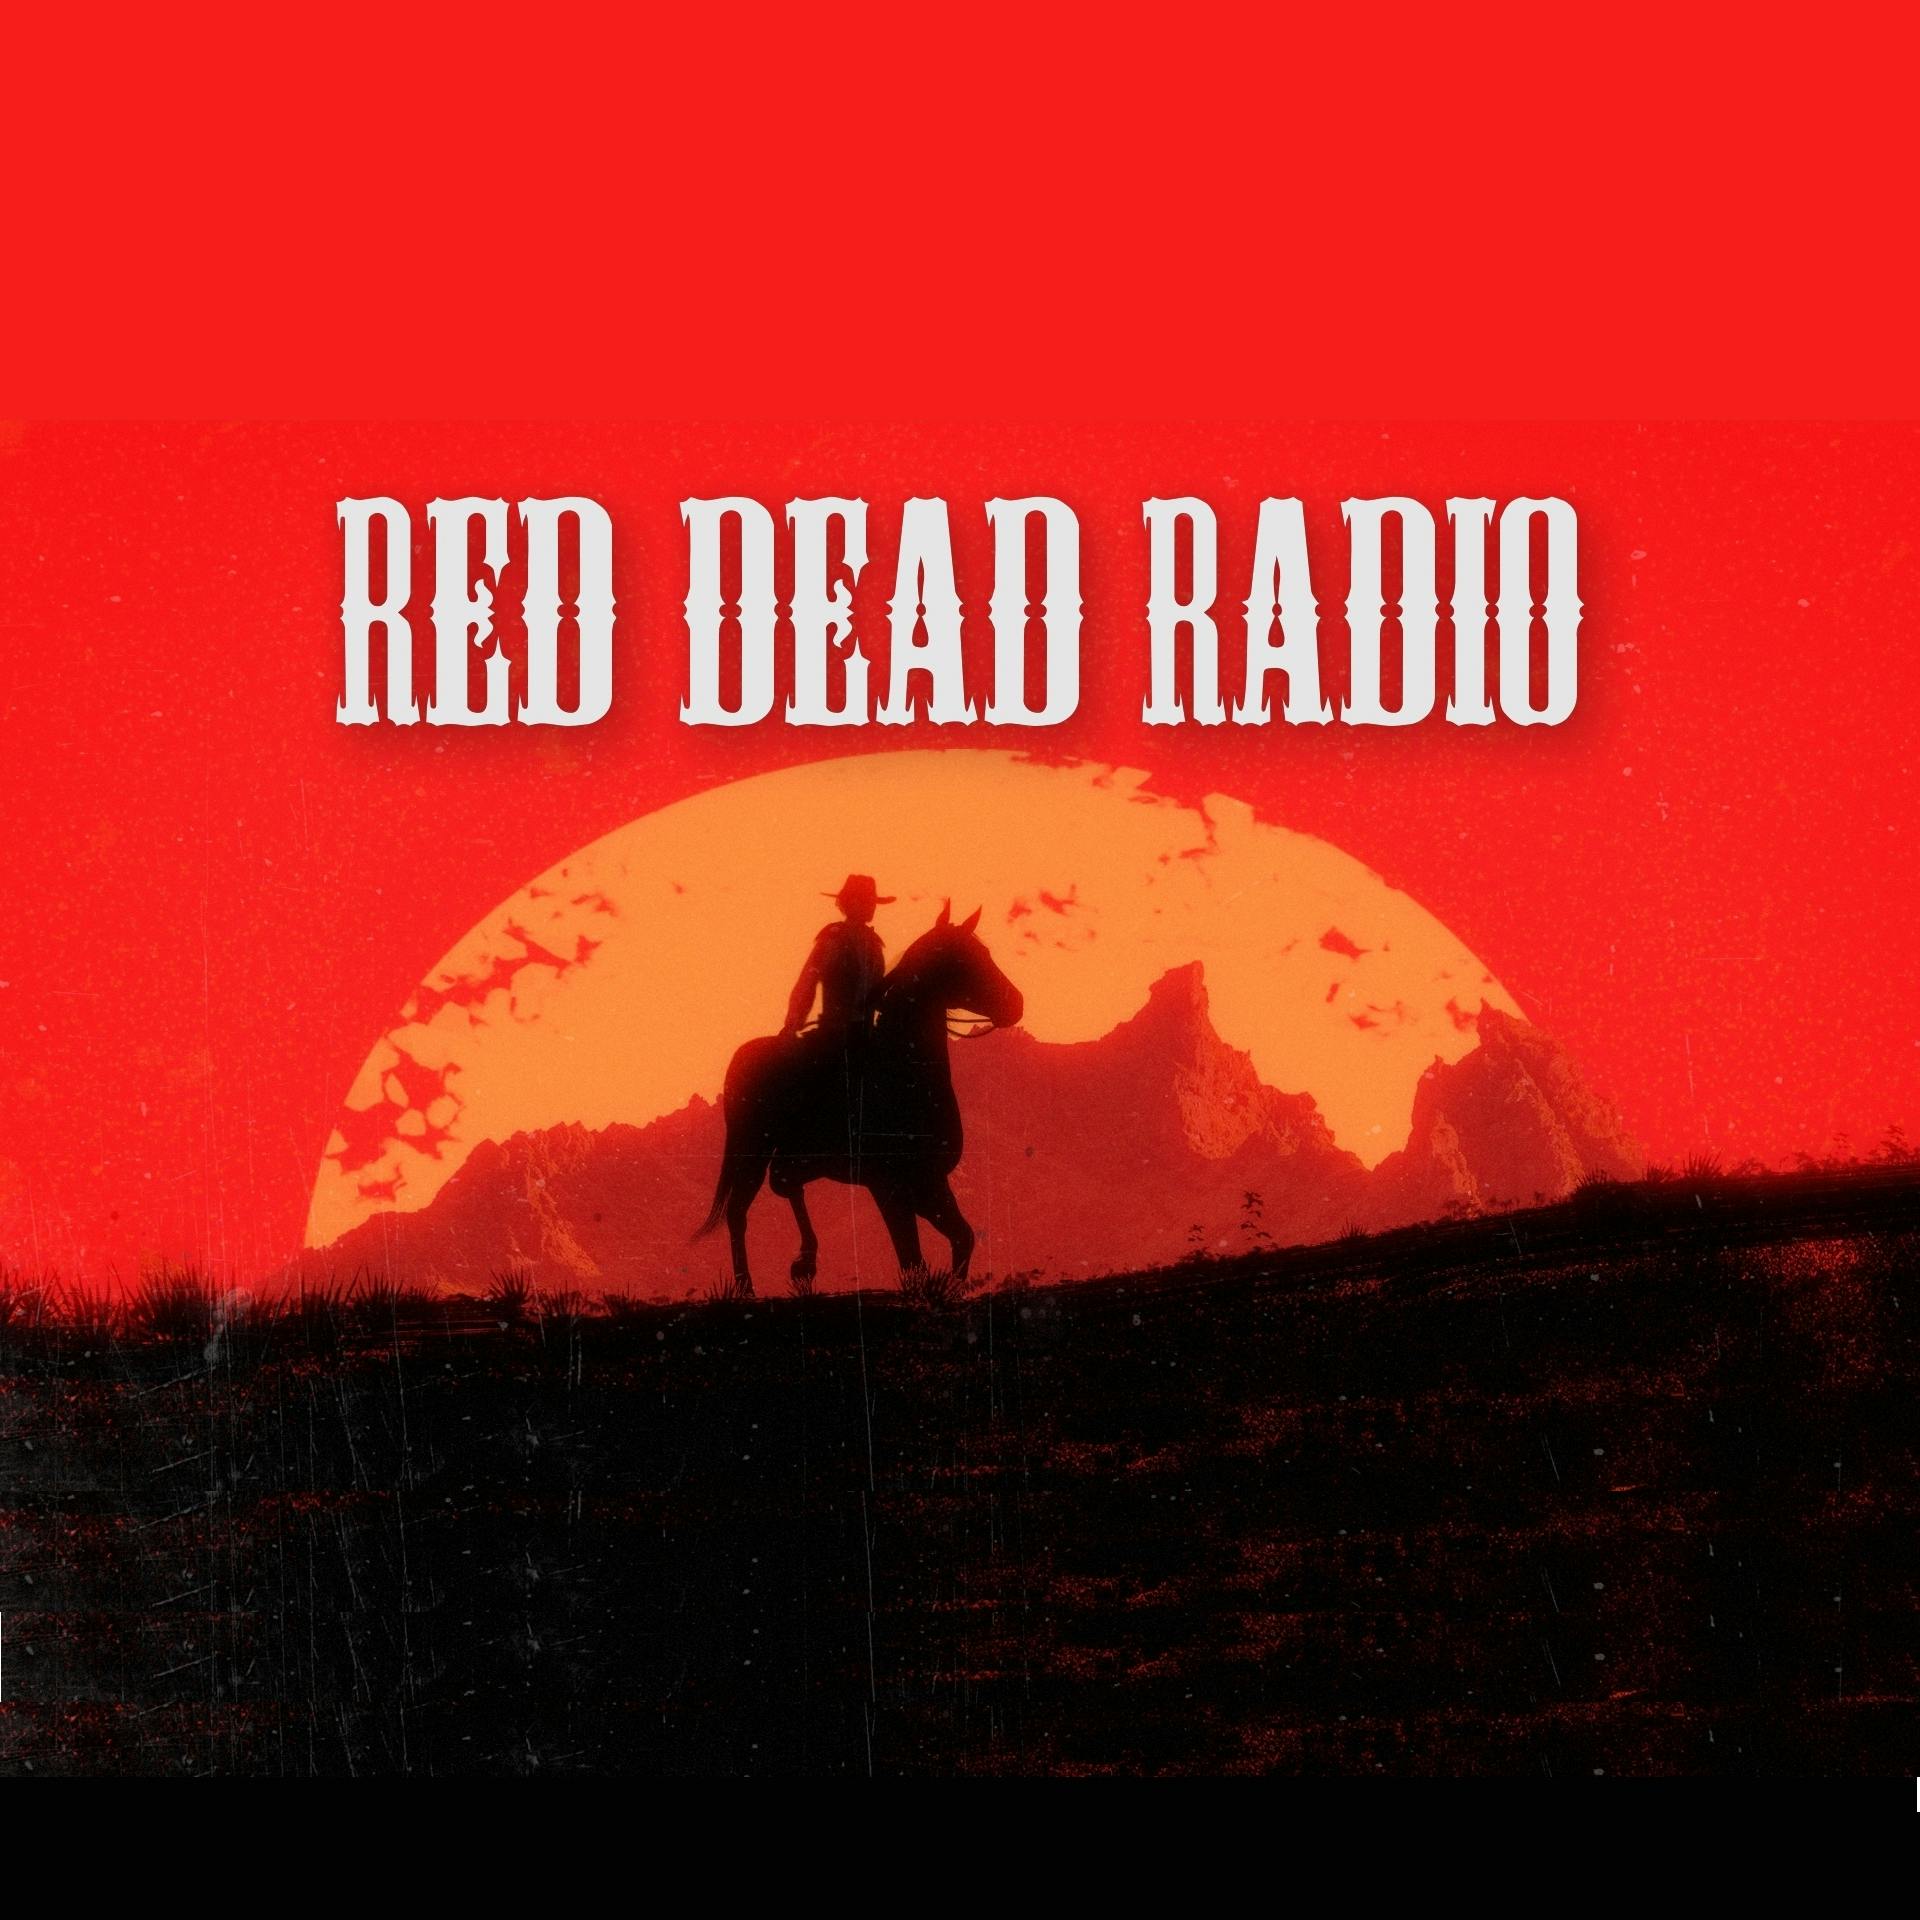 Jared and JR Talk Red Dead Online: Red Dead Radio Ep. 33